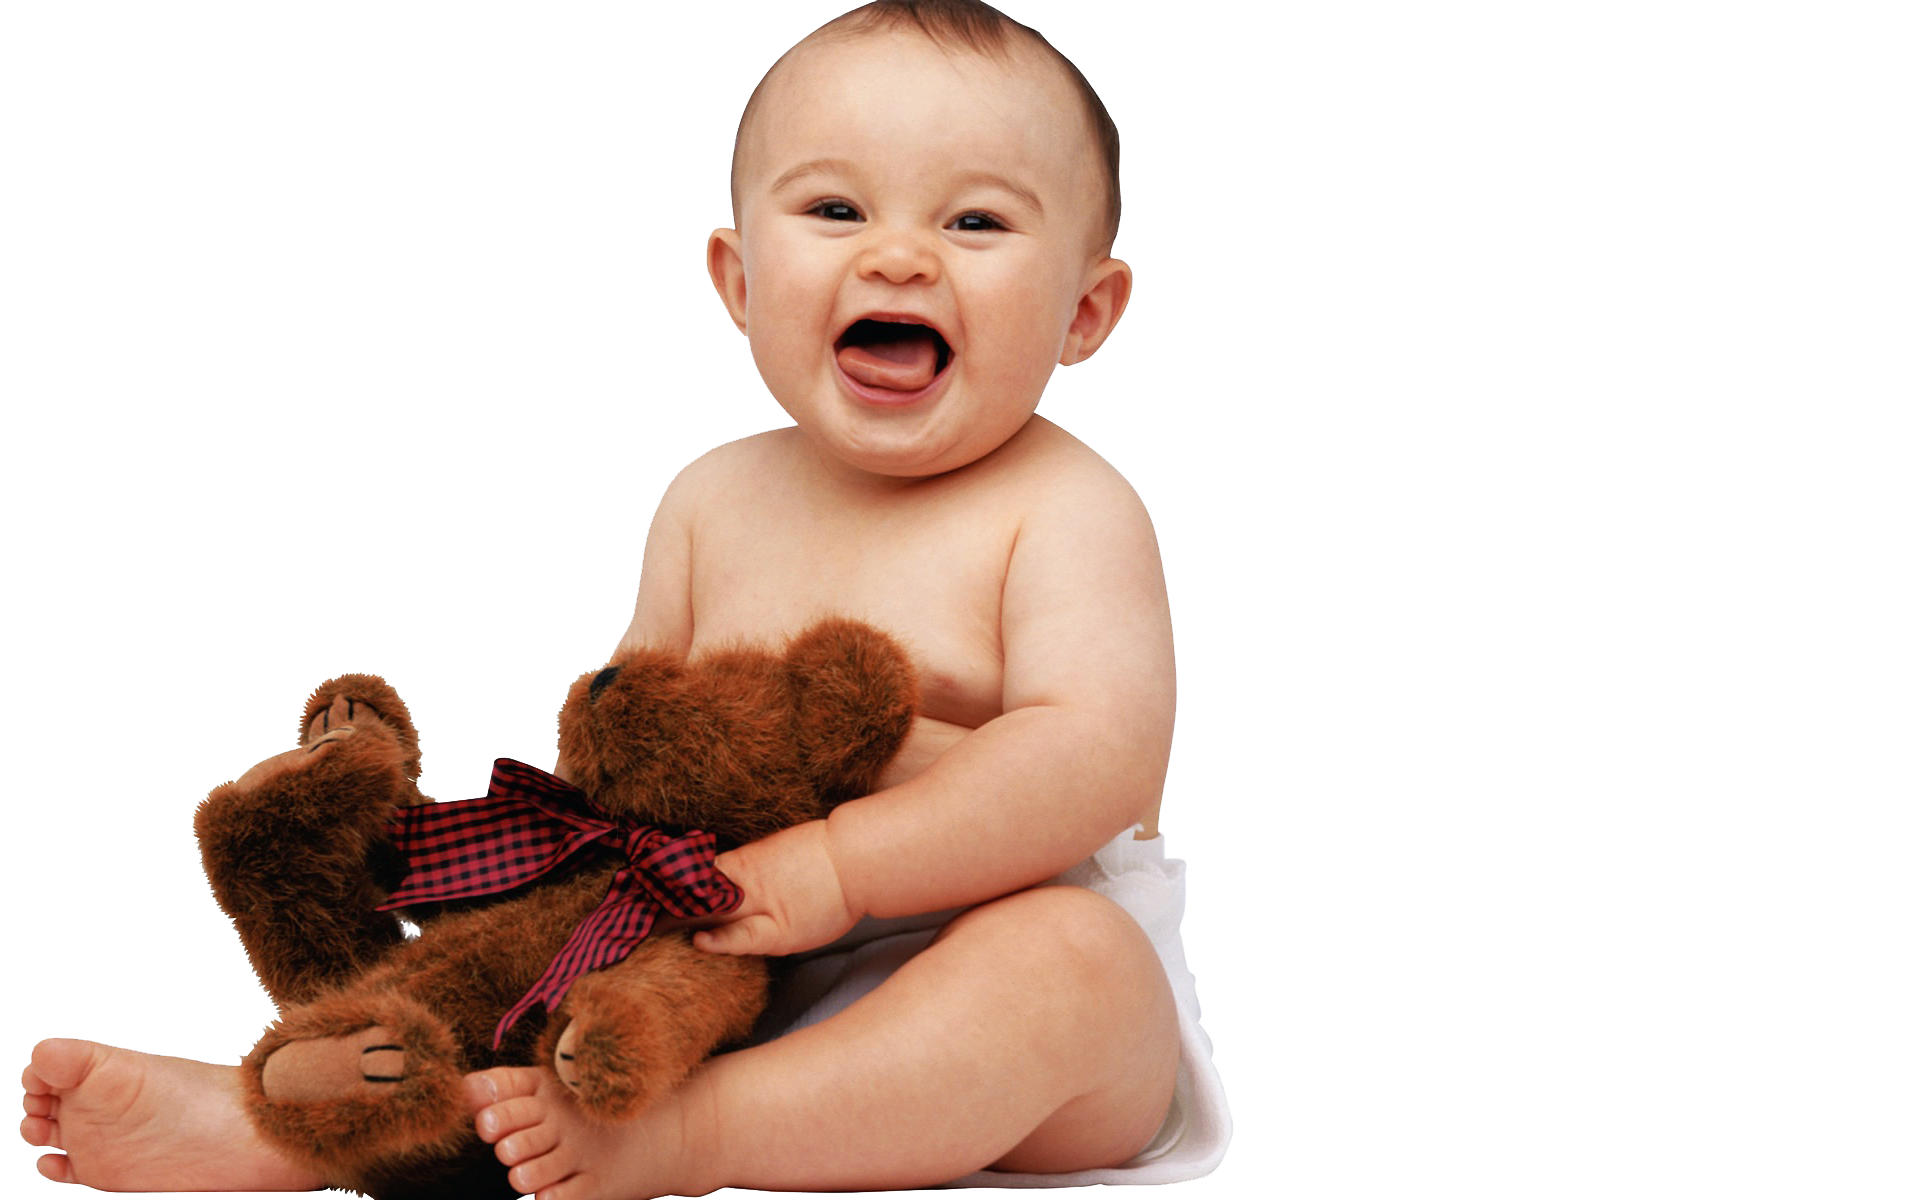 Baby Png Hd - Baby, Transparent background PNG HD thumbnail